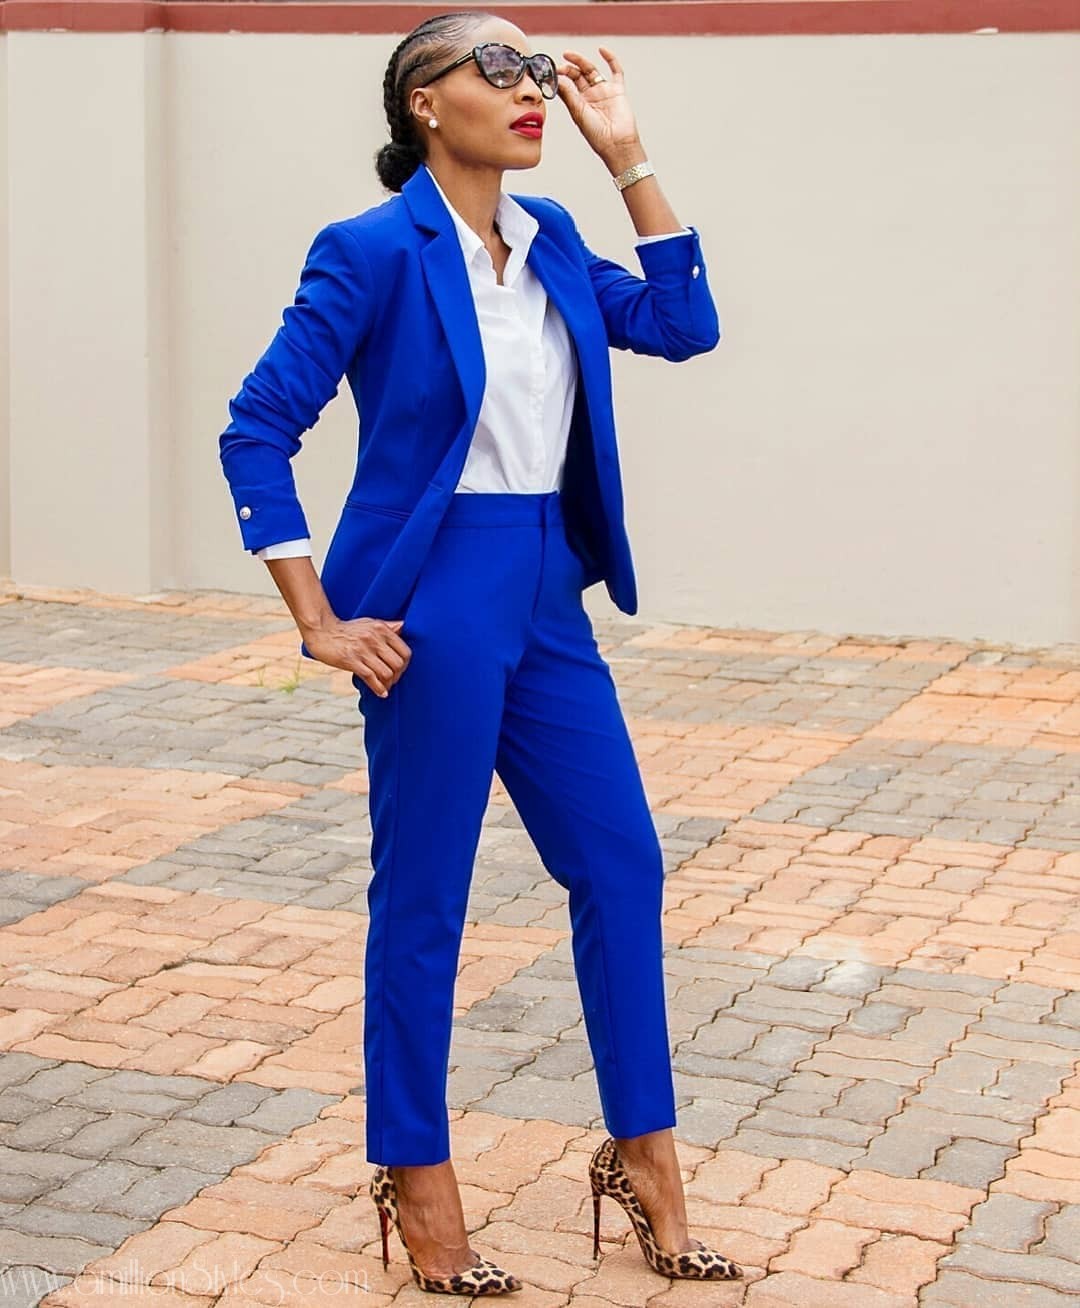 Smash Goals In These Corporate Styles